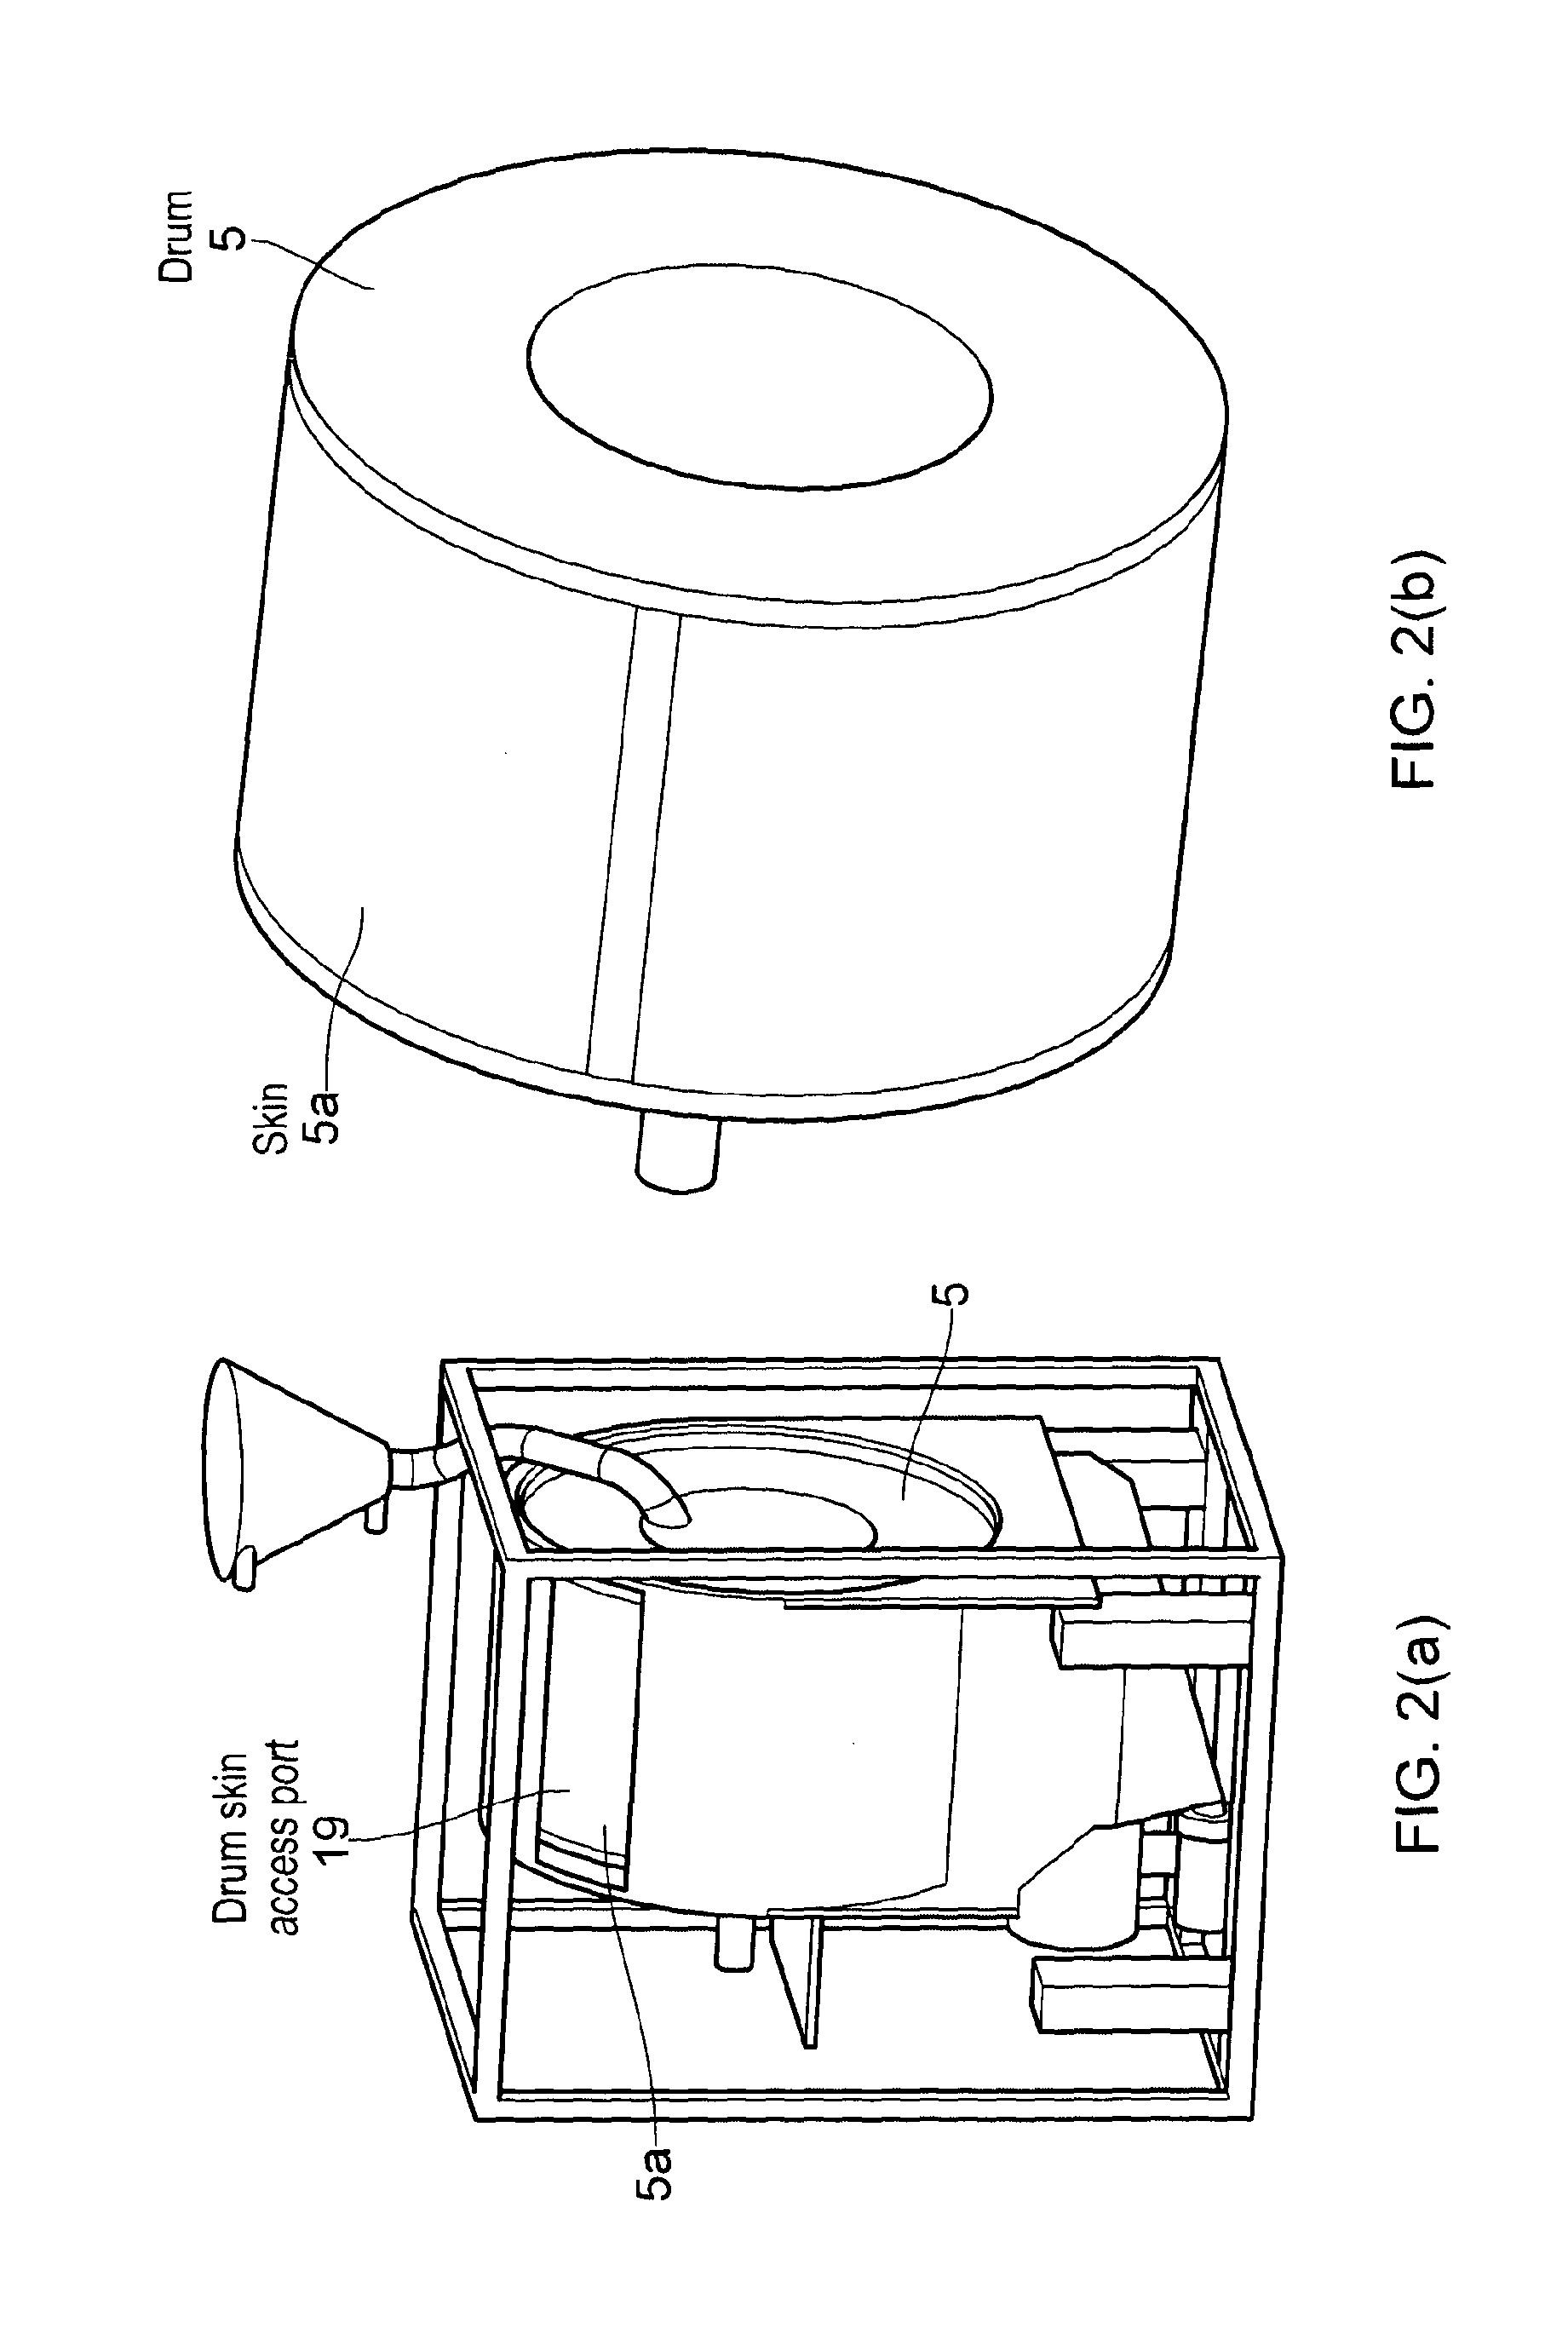 Cleaning apparatus for soiled substrates having a removable cage sealing means